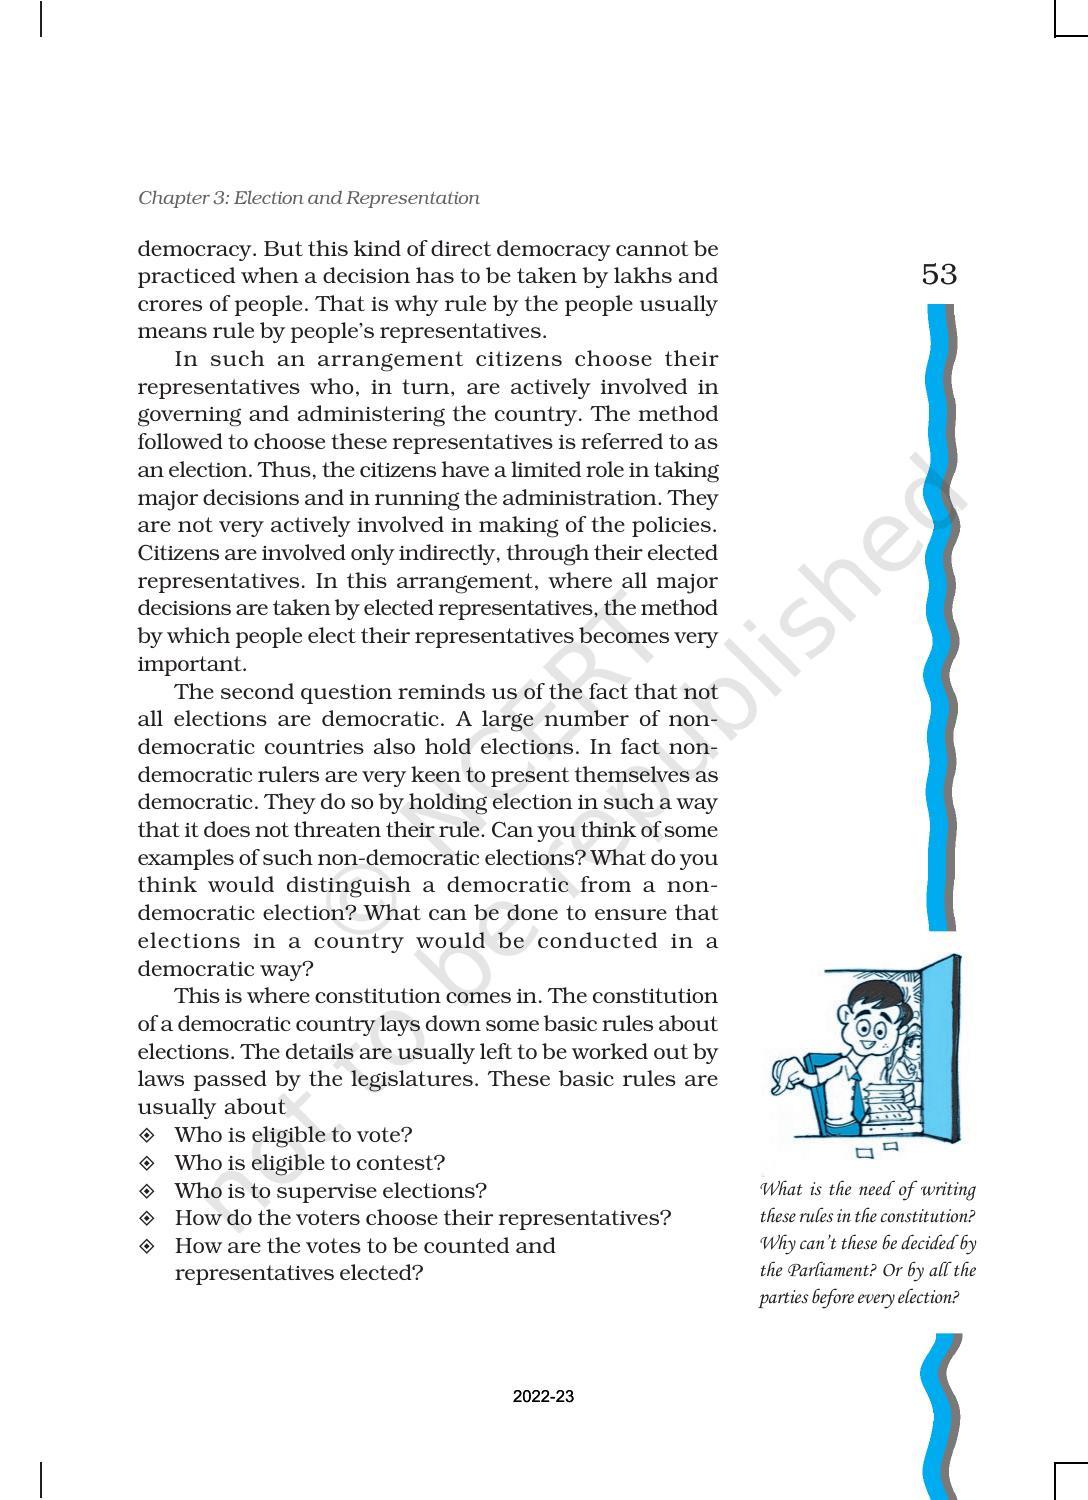 NCERT Book for Class 11 Political Science (Indian Constitution at Work) Chapter 3 Election and Representation - Page 3